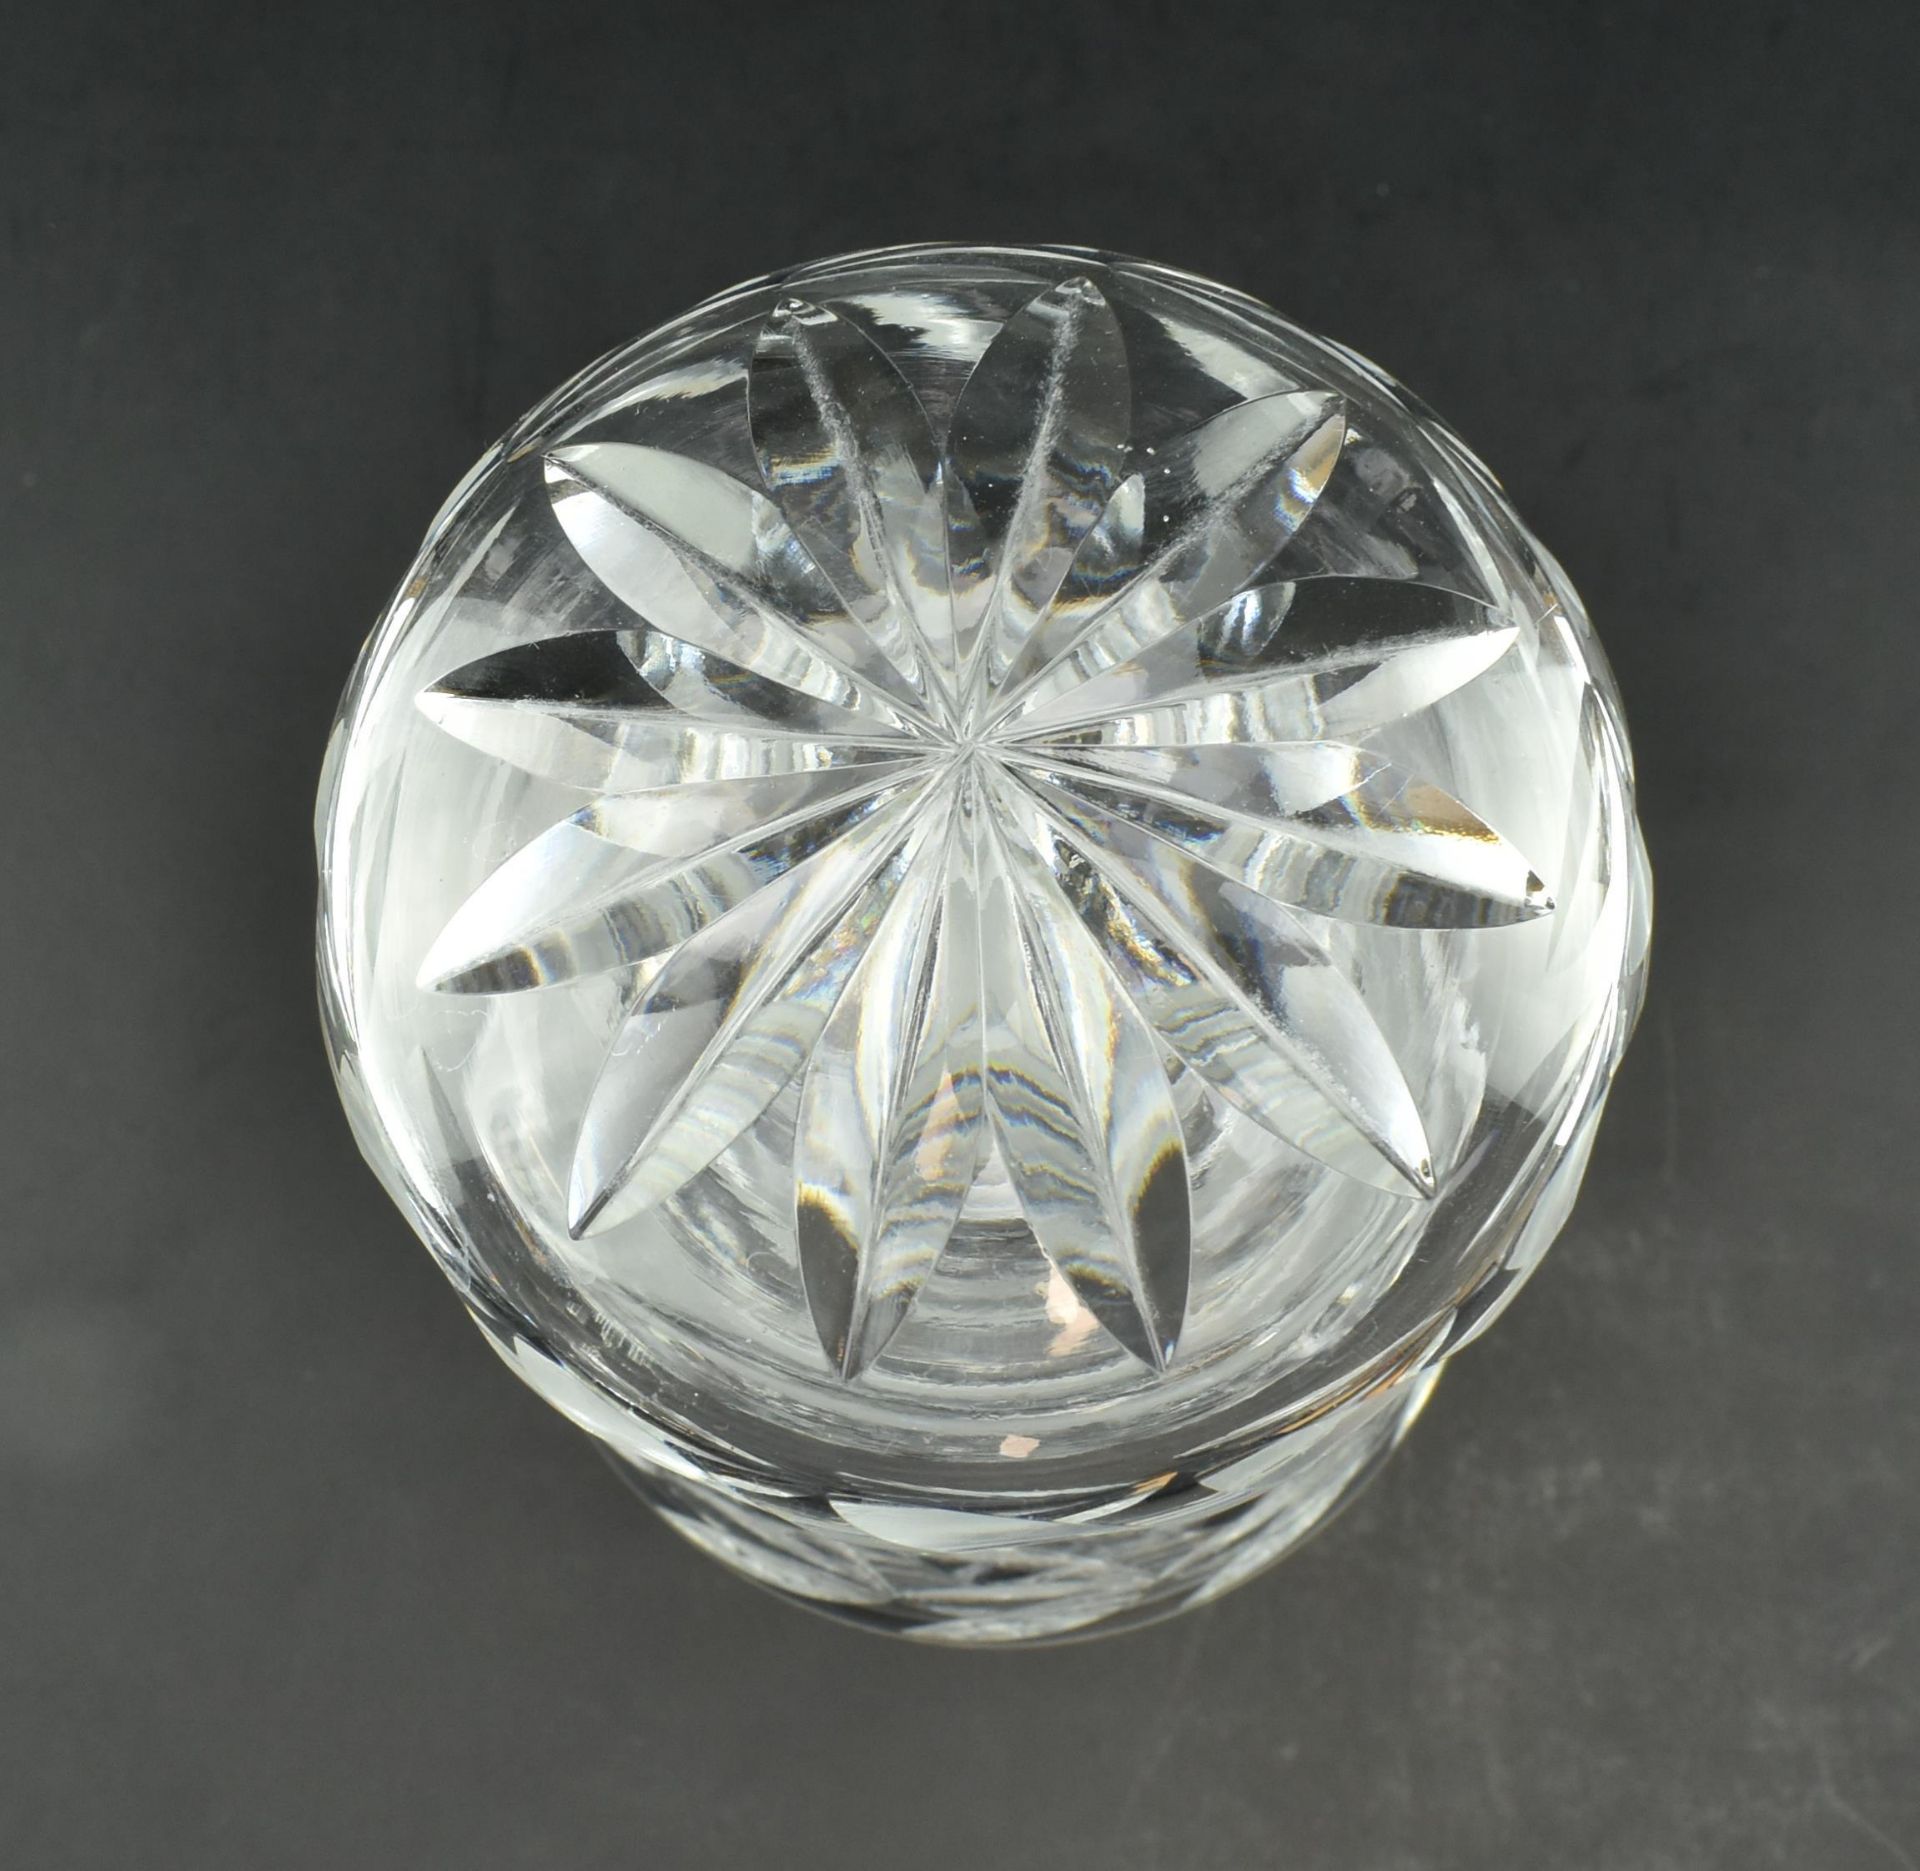 WATERFORD CRYSTAL GLASS COCKTAIL SHAKER - Image 3 of 8